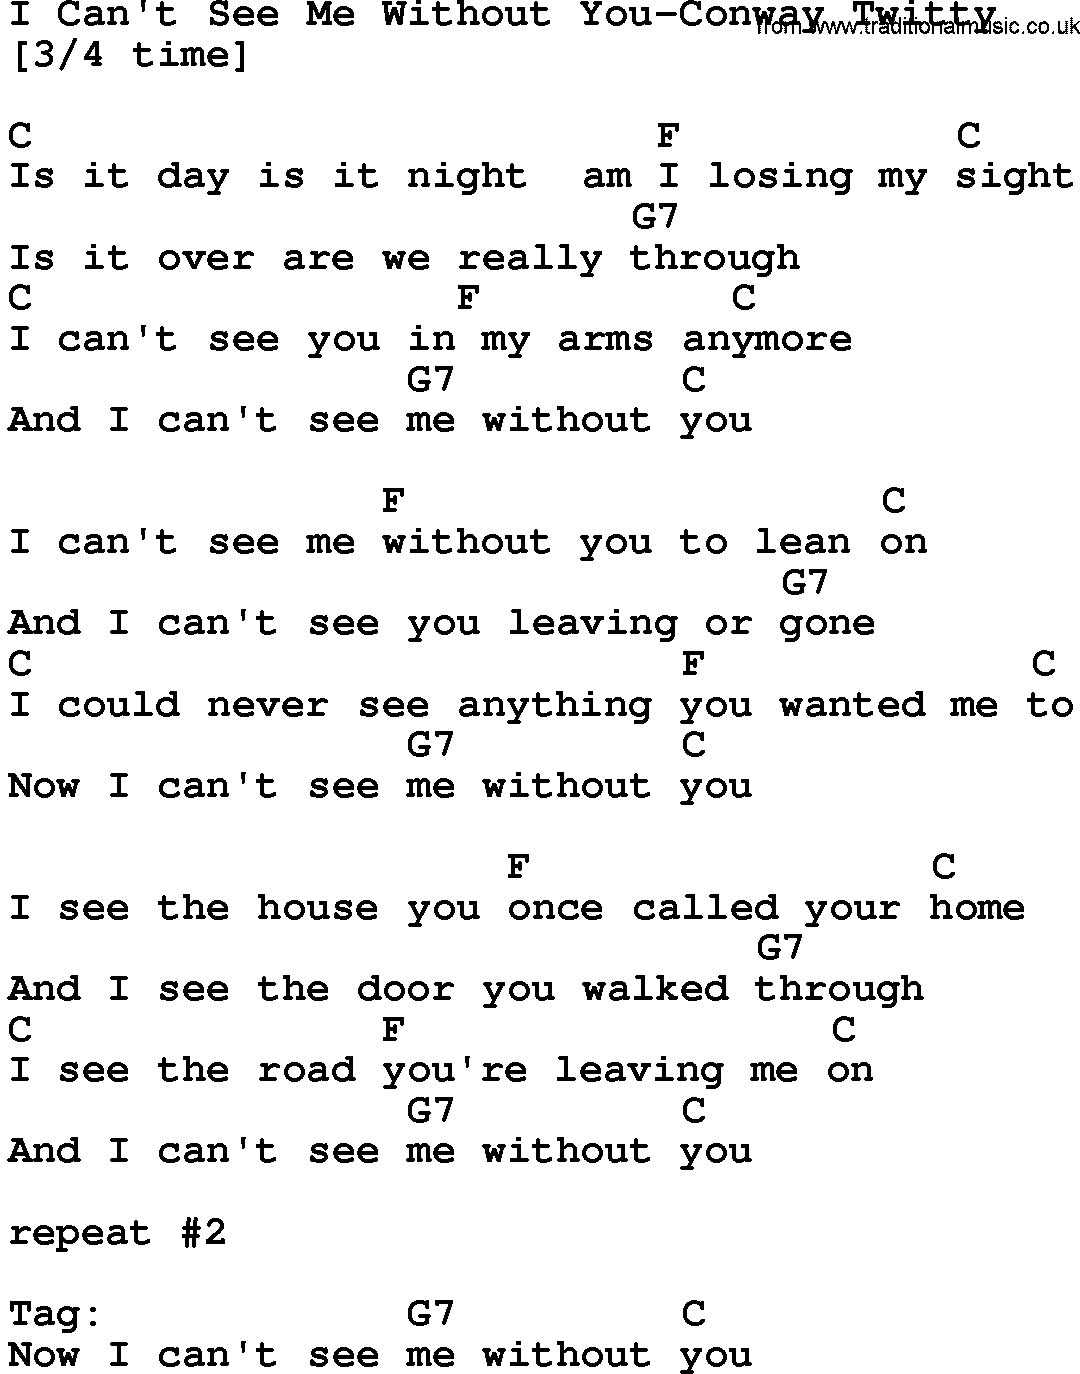 Country music song: I Can't See Me Without You-Conway Twitty lyrics and chords